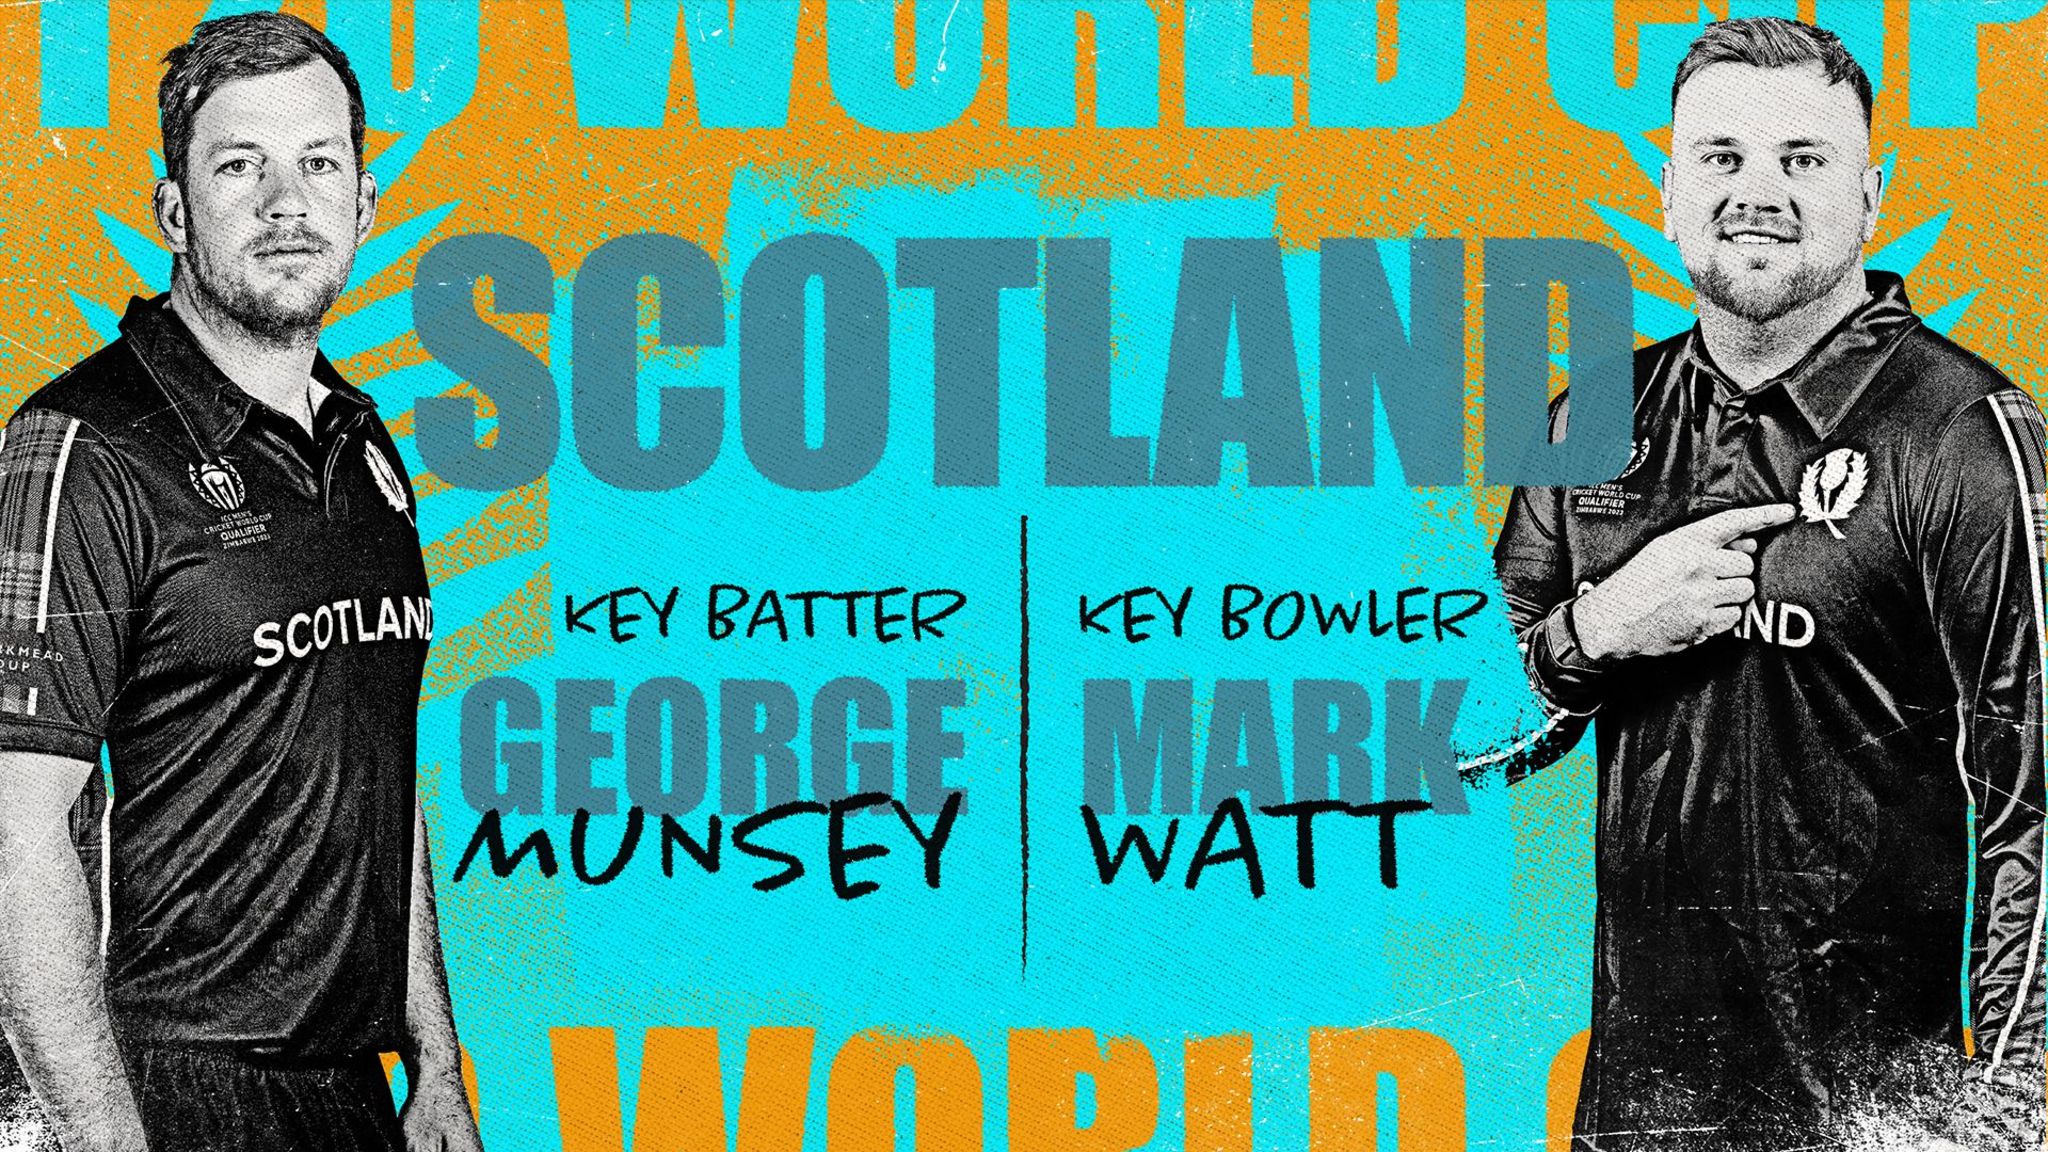 A graphic showing George Munsey and Mark Watt as Scotland's key batter and key bowler at the Men's T20 World Cup